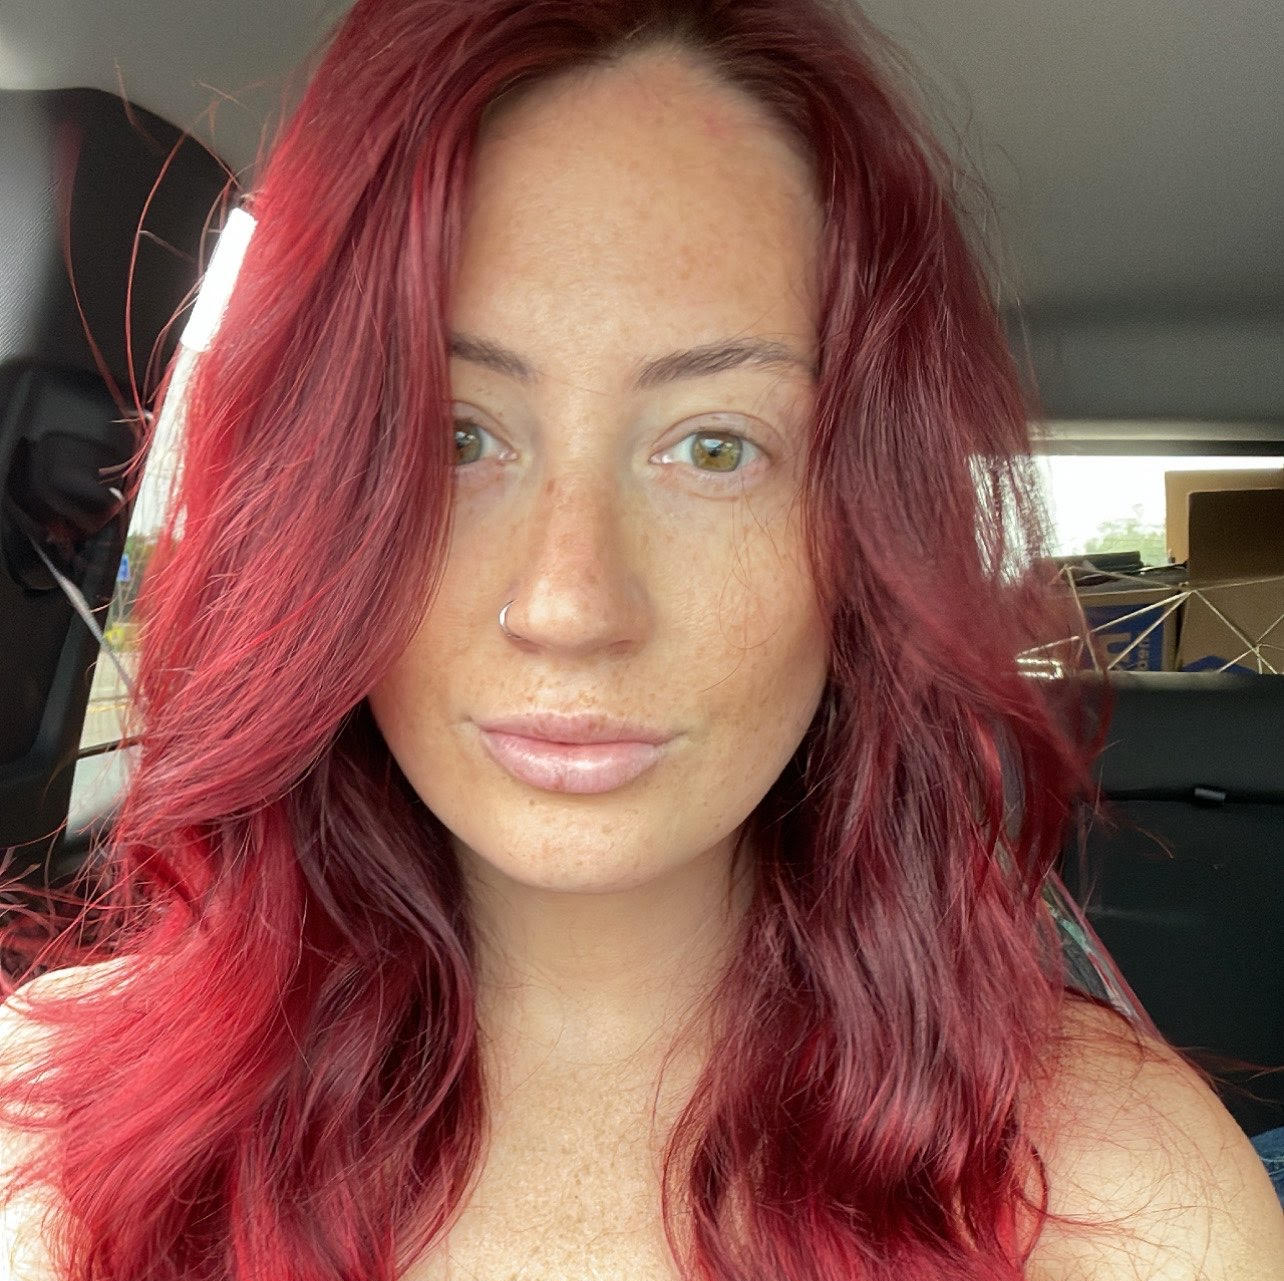 A woman with red hair is sitting in the back seat of a car.